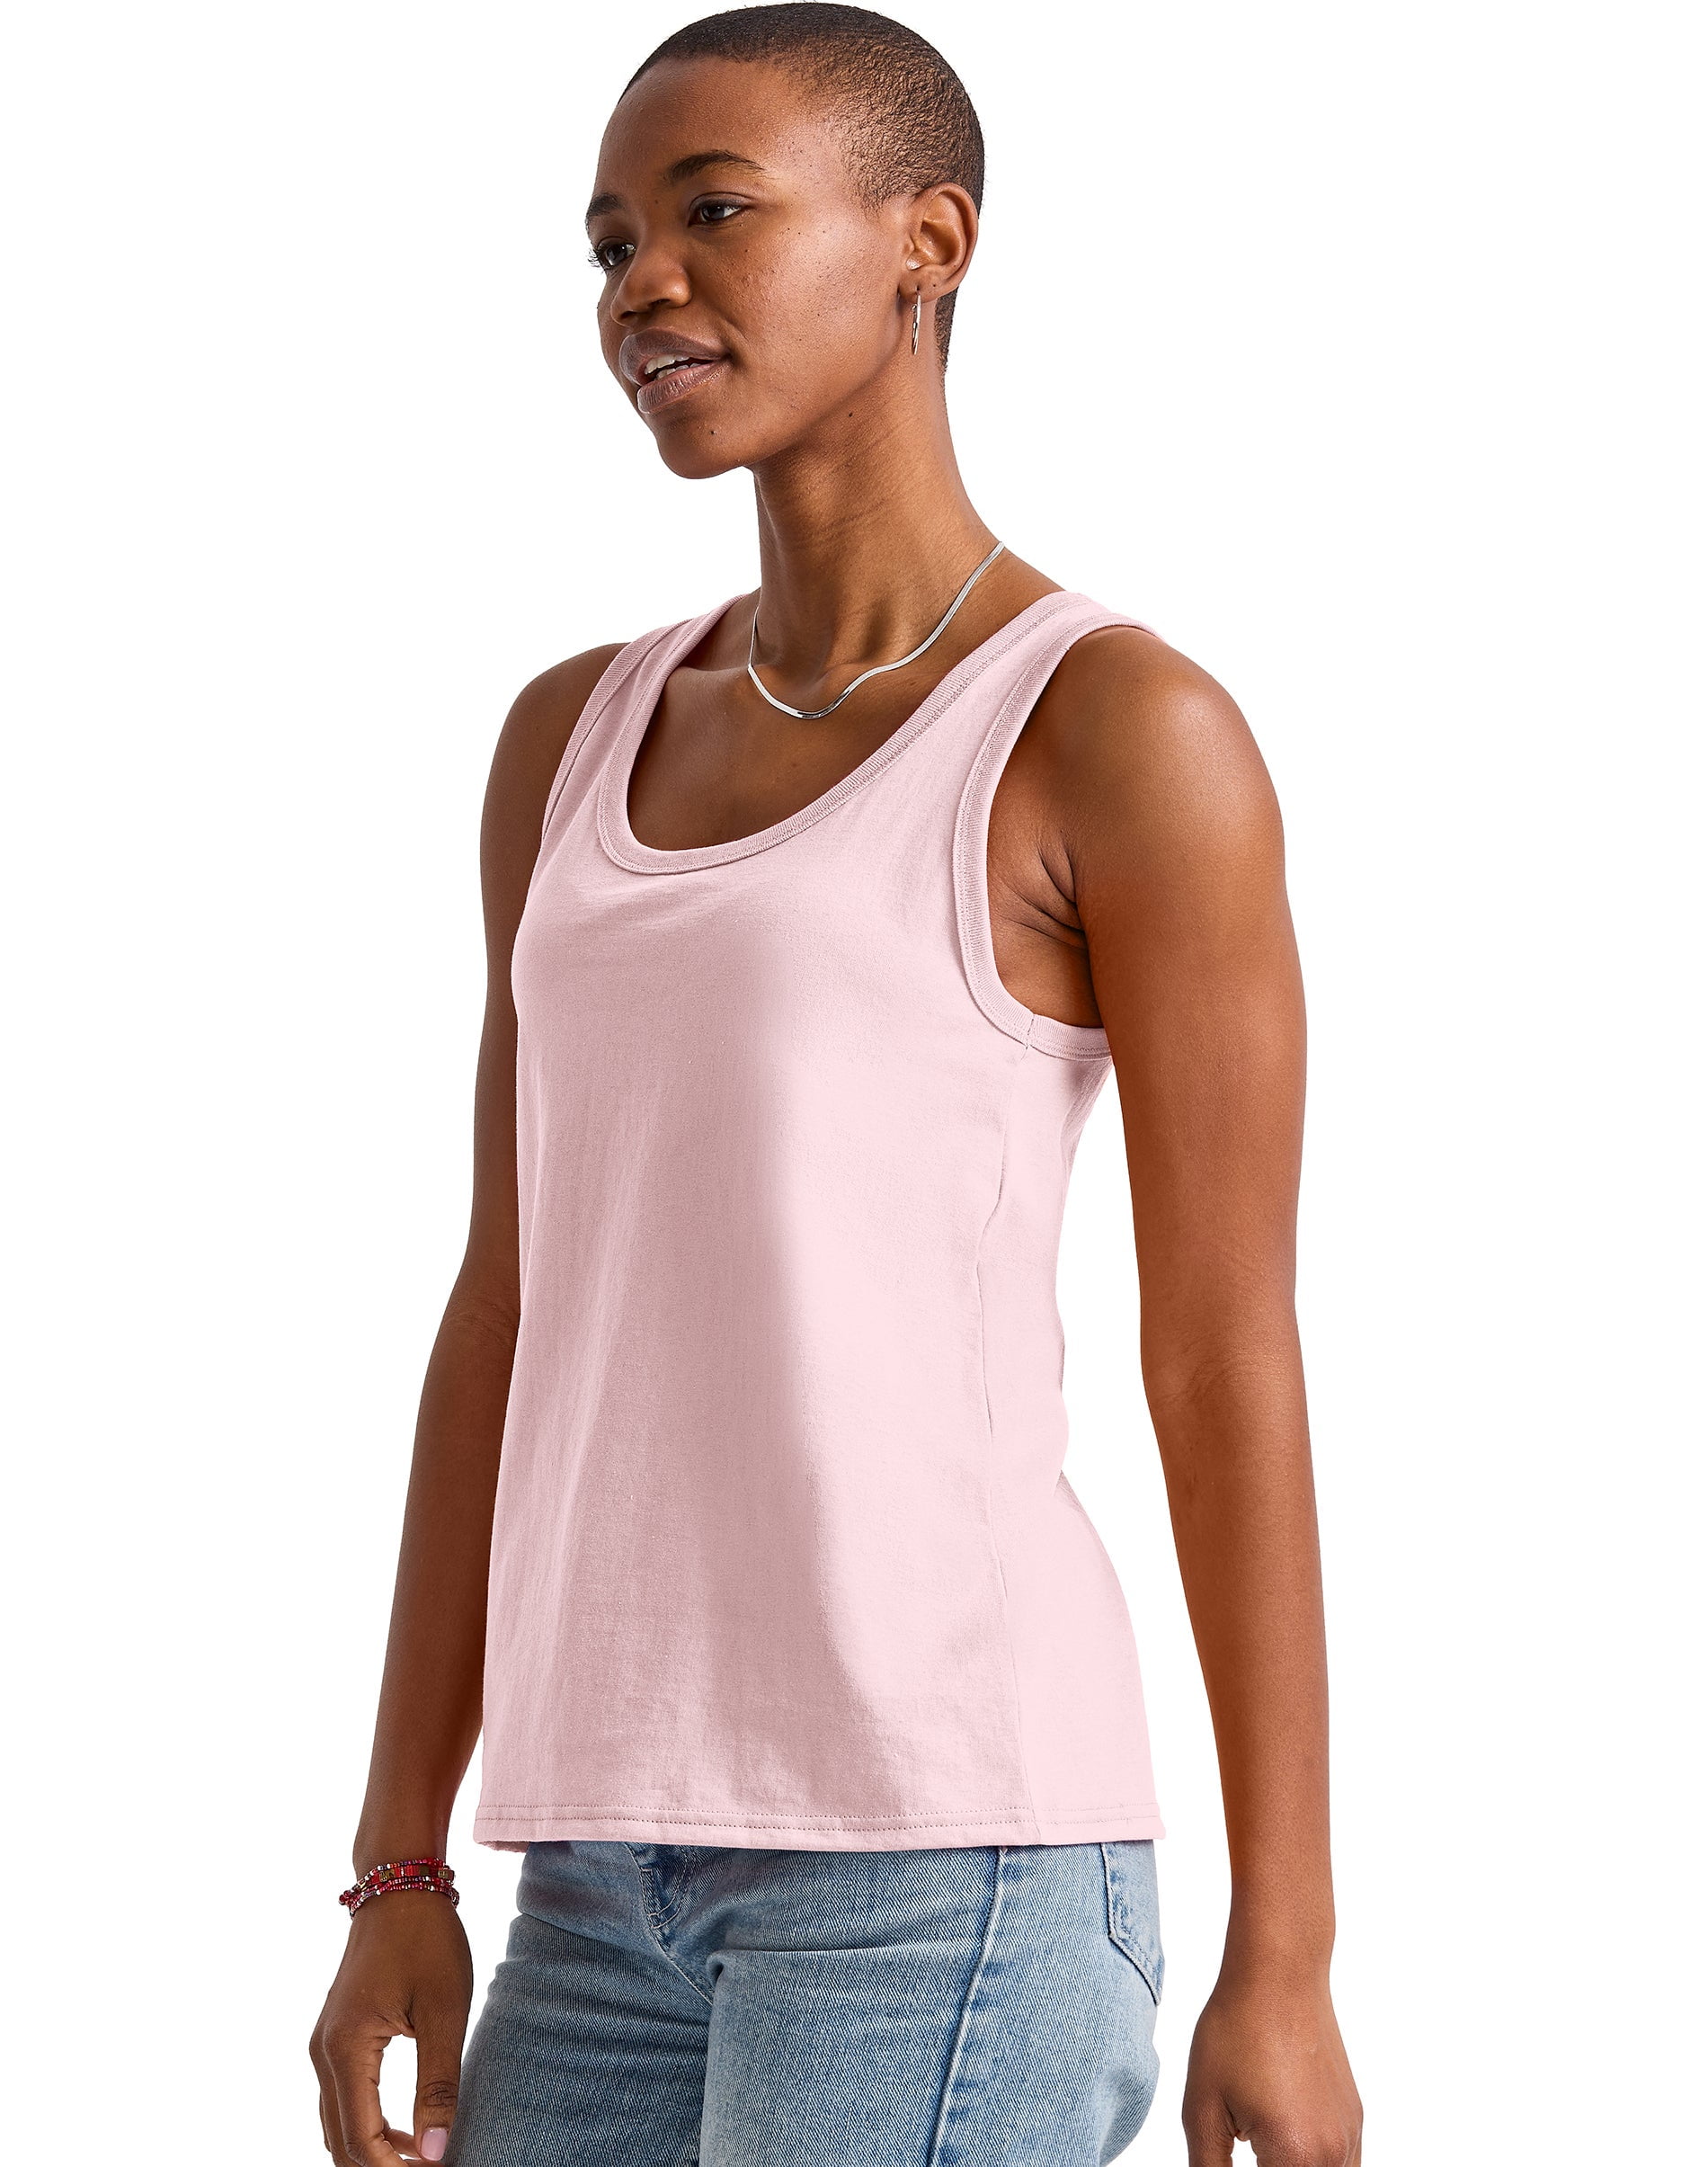 Hanes Wide Strap Tank Top Combed Cotton Jersey, $5, Sierra Trading Post